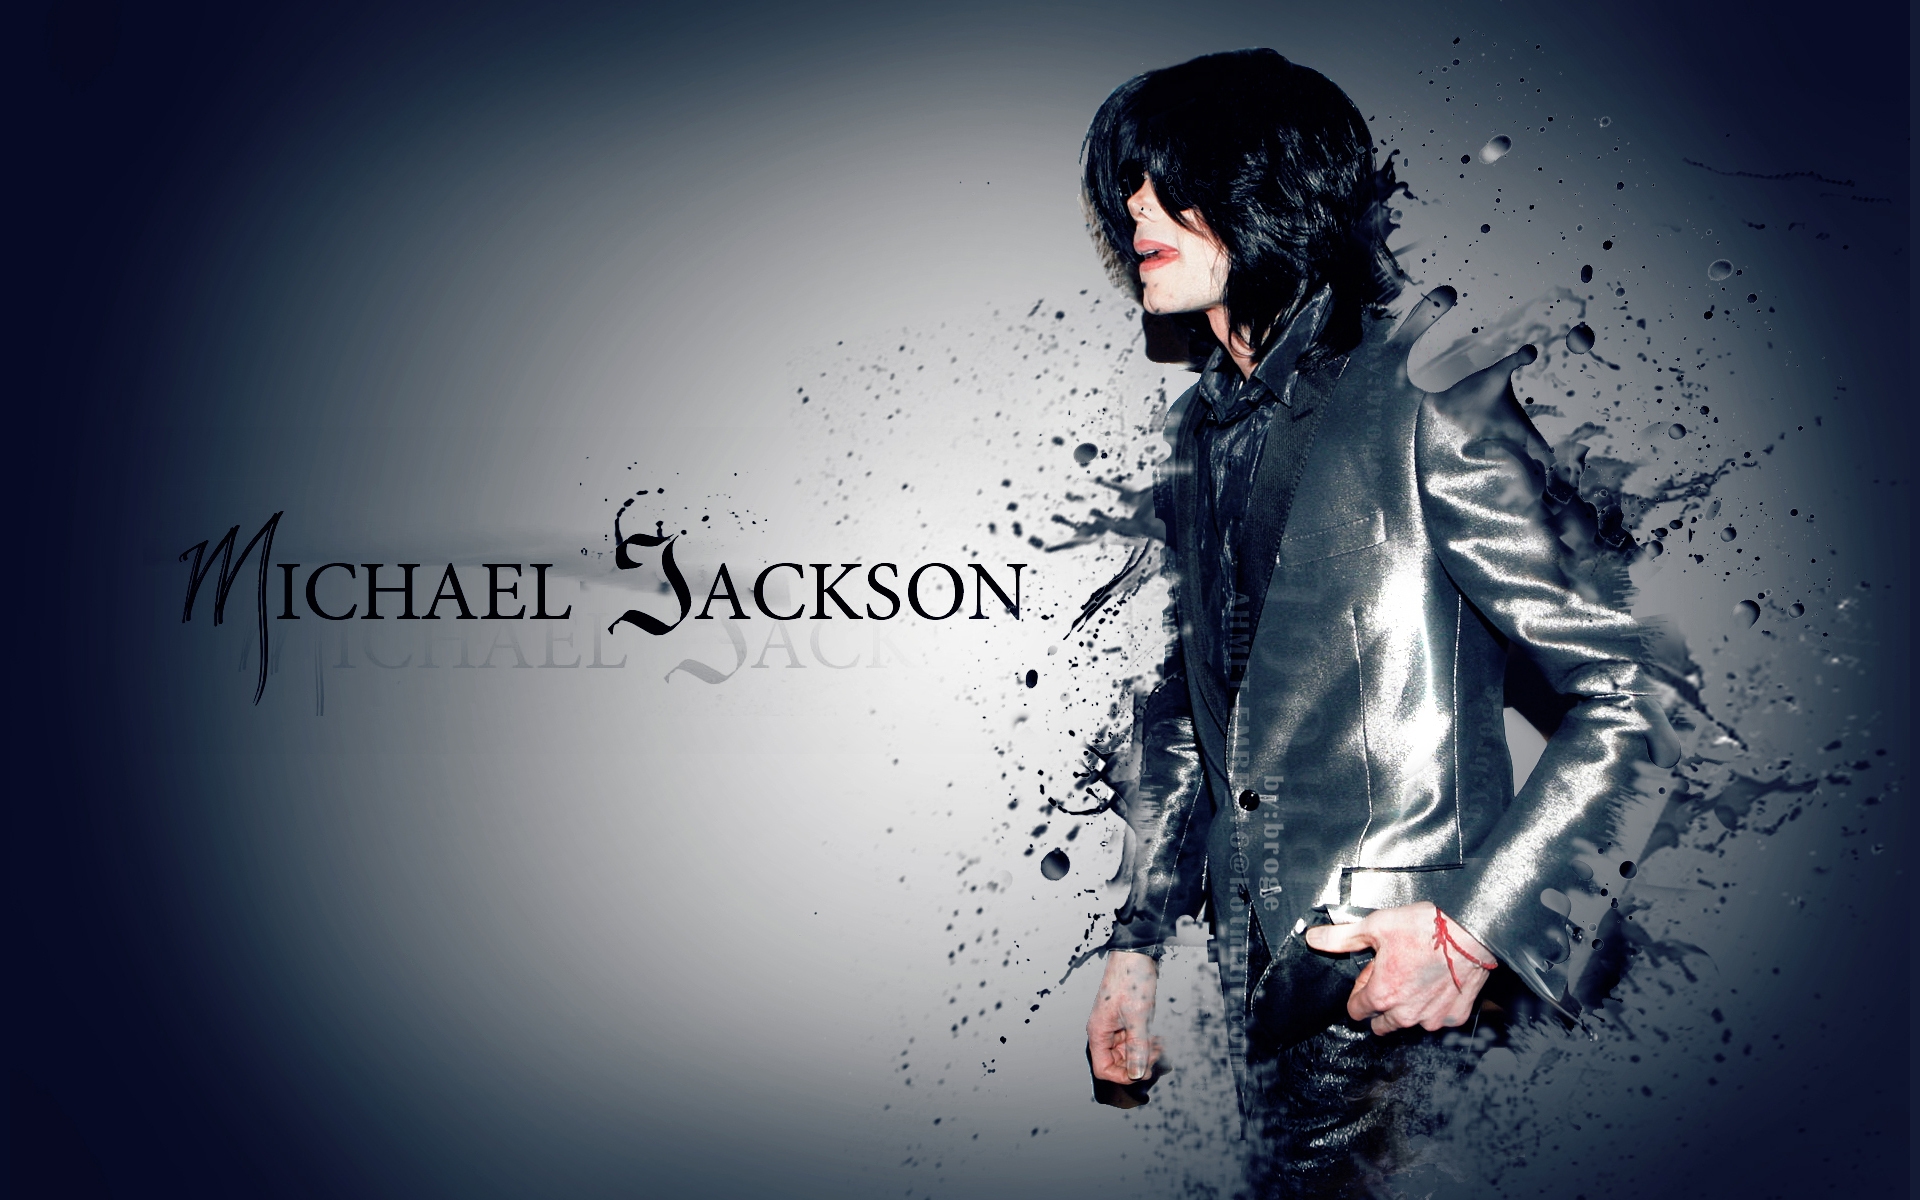 1152x864 Michael Jackson Glamorous Wallpapers 1152x864 Resolution Wallpaper Hd Celebrities 4k Wallpapers Images Photos And Background